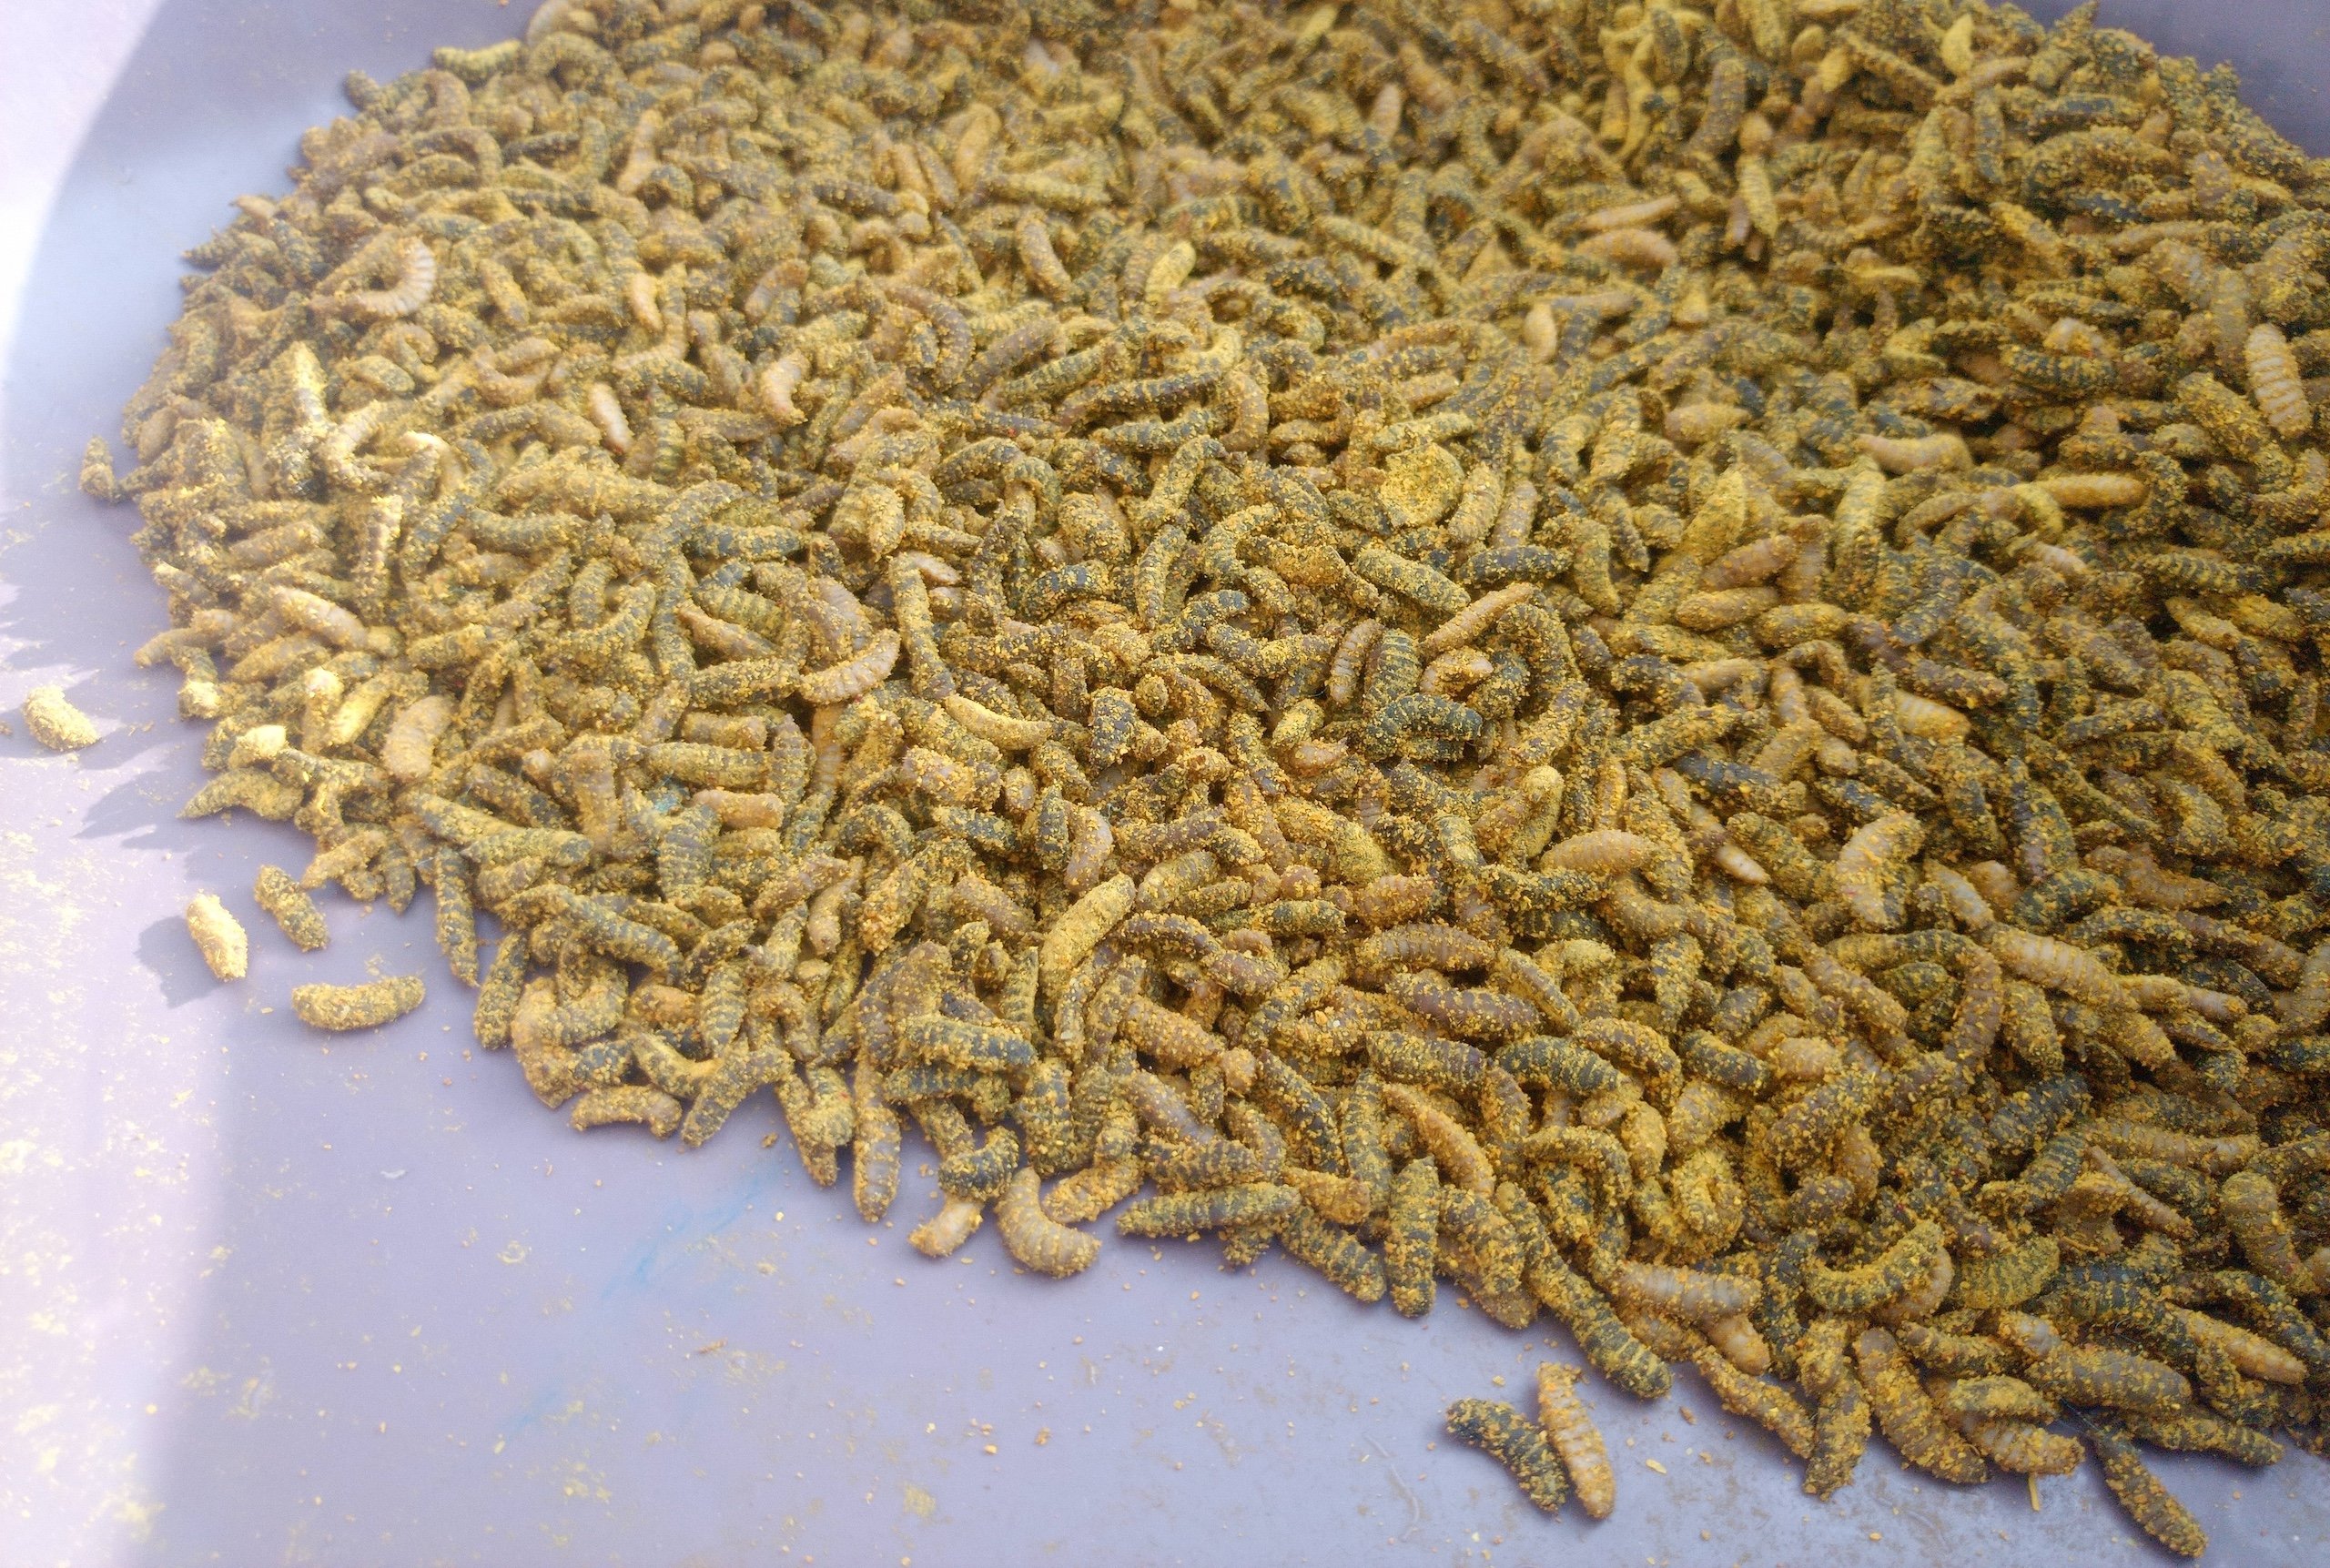 A pile of yellow colored black soldier fly larvae